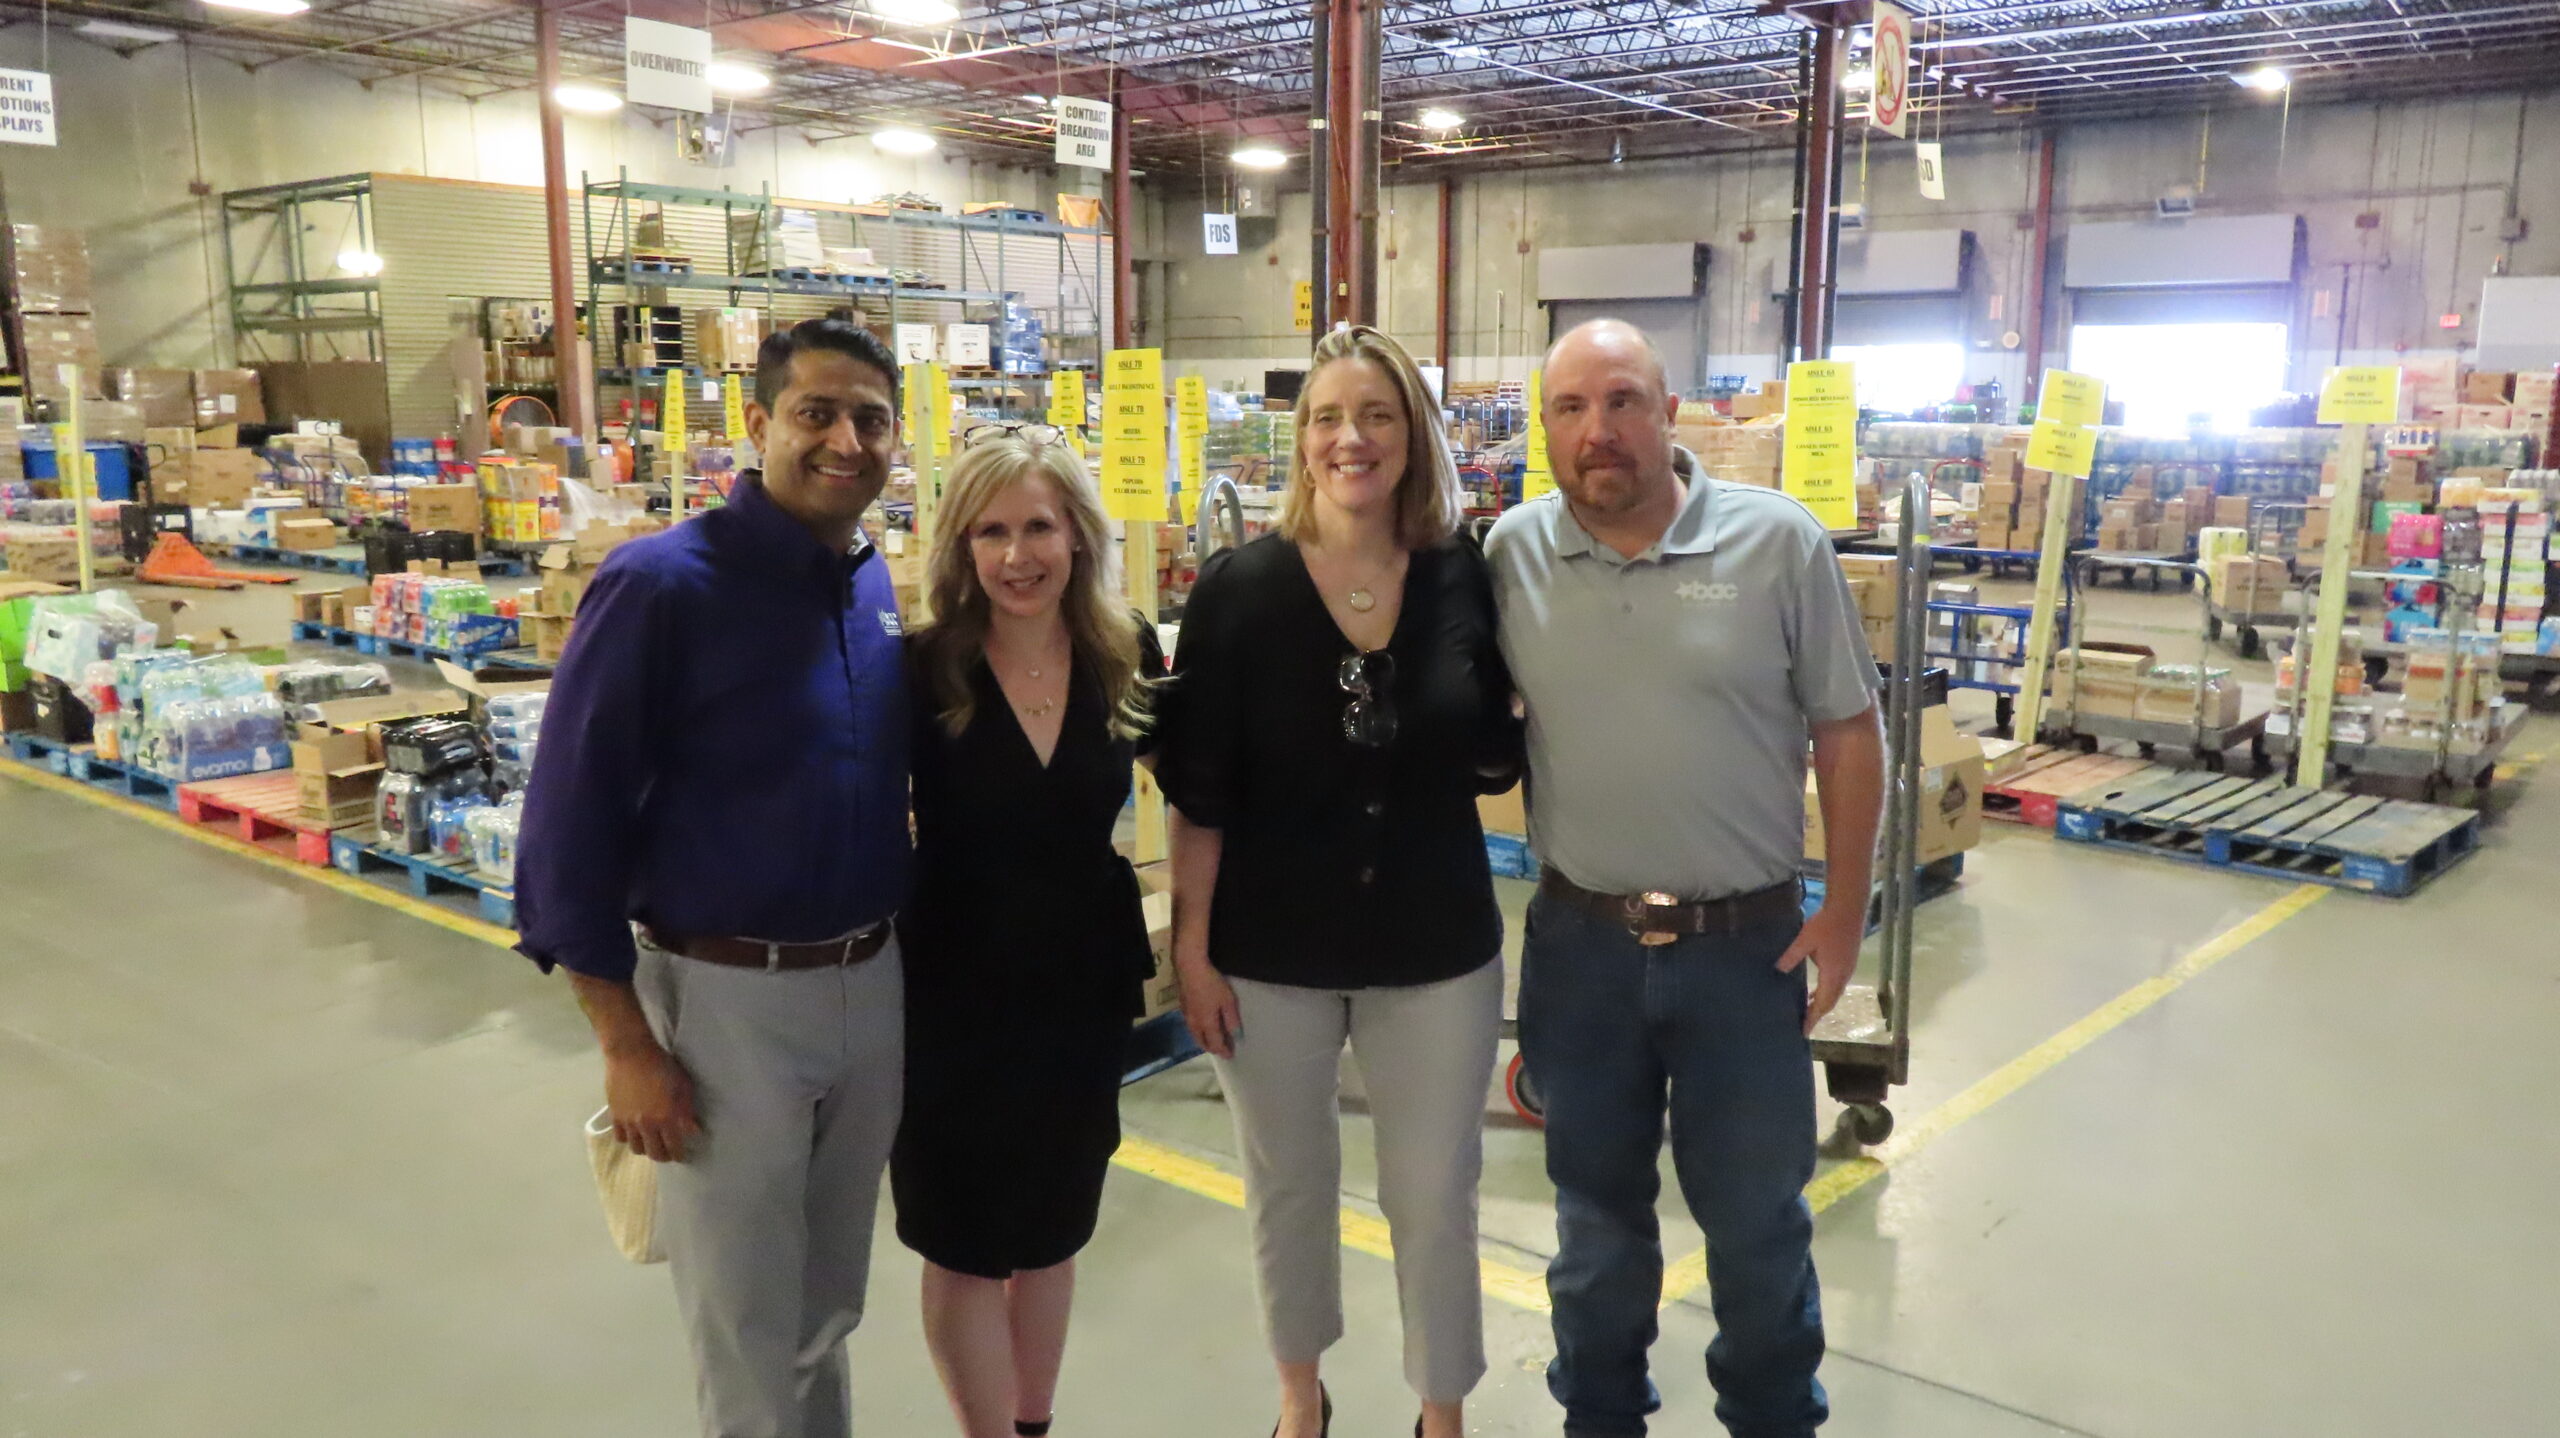 Executive Director of the U.S. AbilityOne Commission, Kimberly Zeich Visits Patrick Commissary